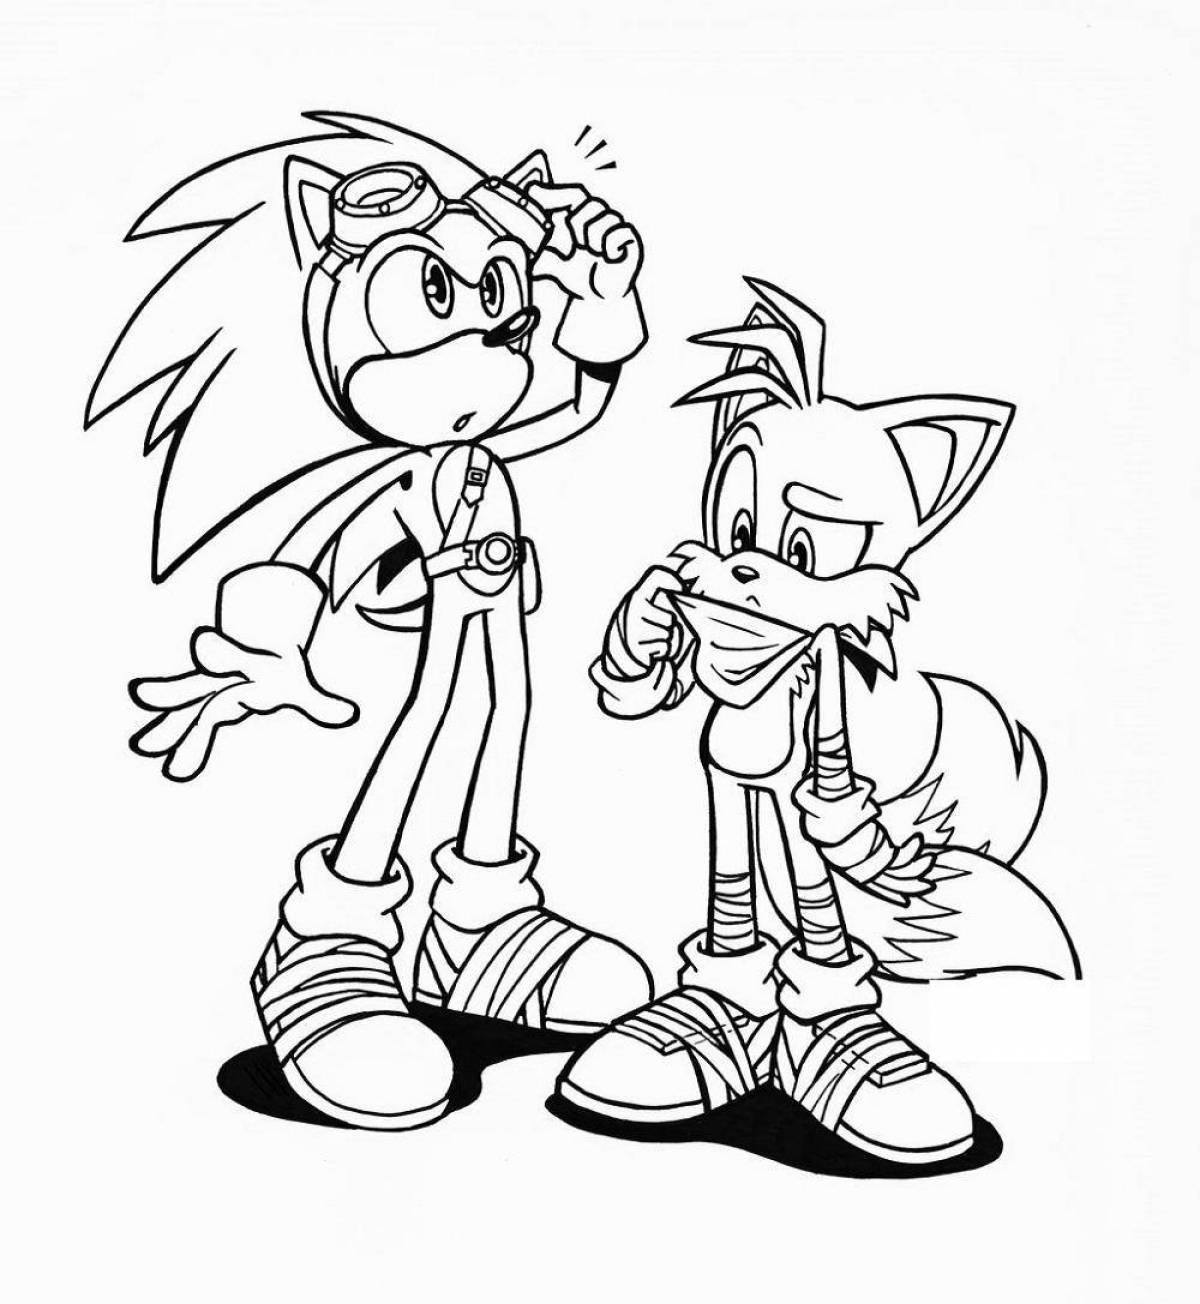 Sonic all heroes dazzling coloring book